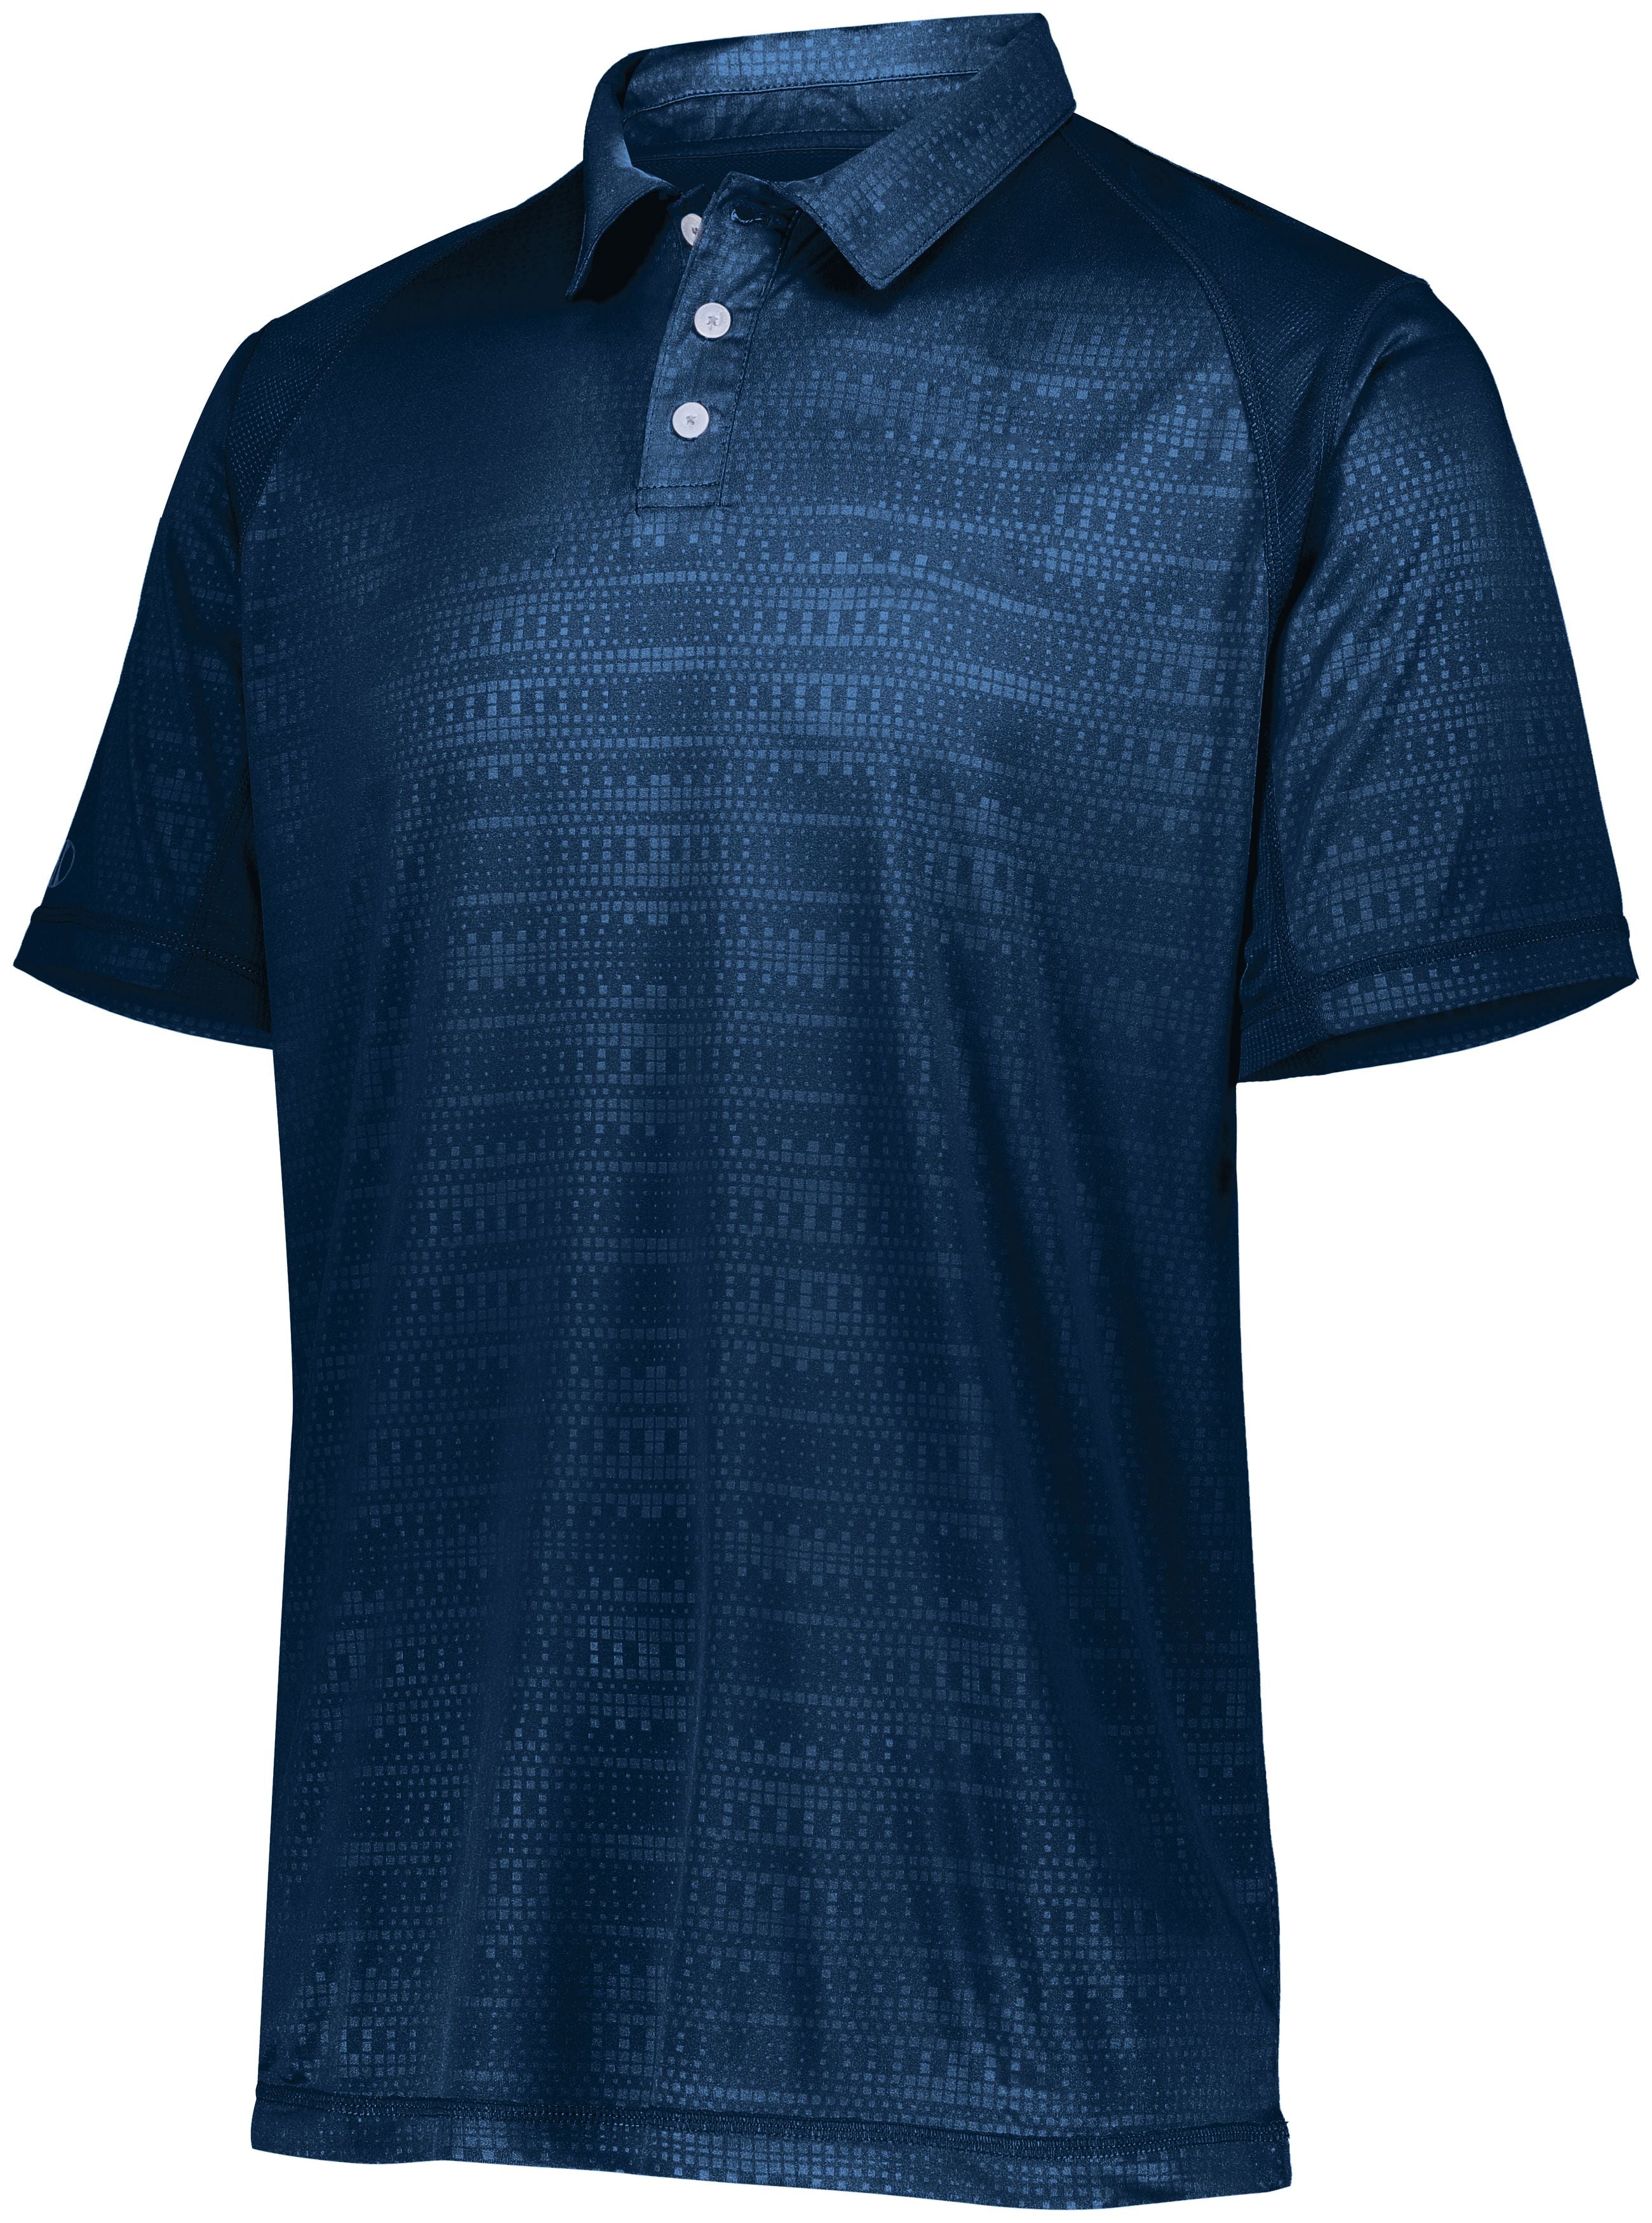 Holloway Converge Polo in Navy  -Part of the Adult, Adult-Polos, Polos, Holloway, Shirts, Converge-Collection product lines at KanaleyCreations.com